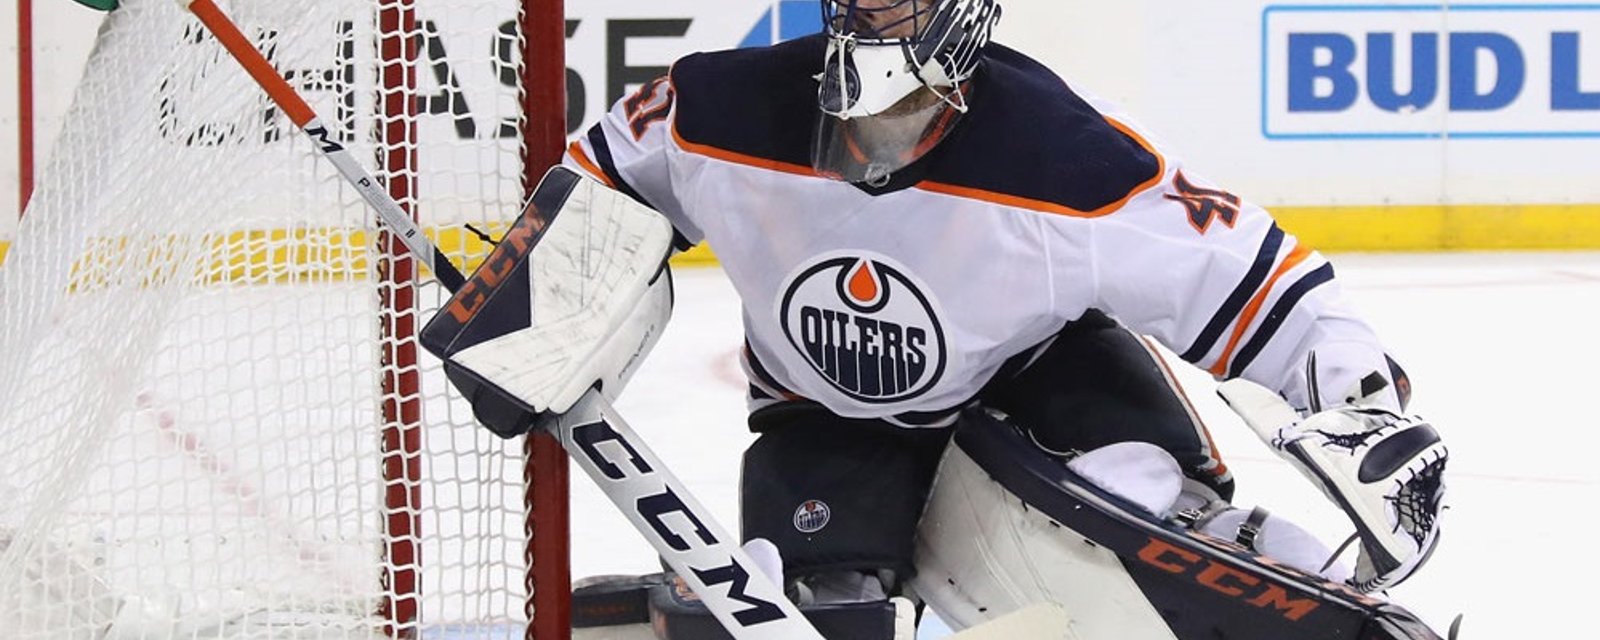 The Oilers have signed goaltender Mike Smith.